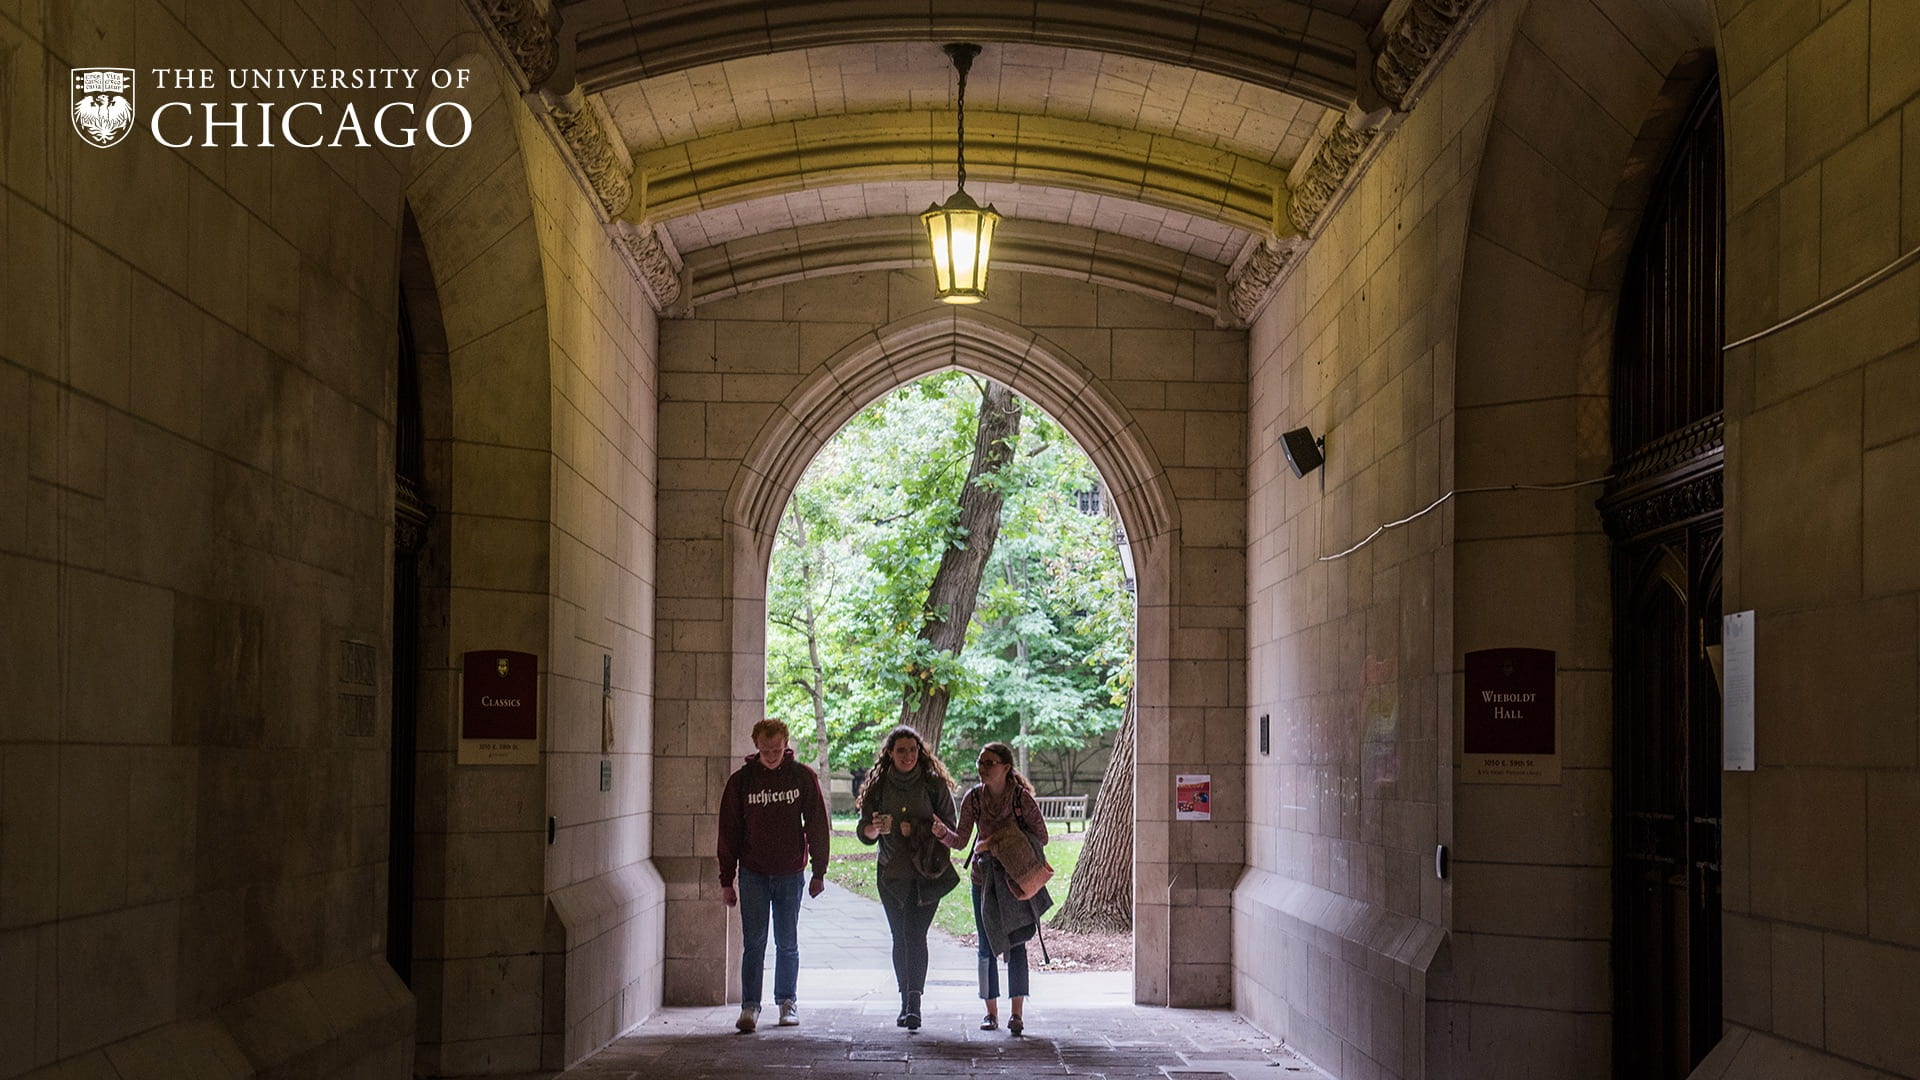 Students walking through a stone archway off a pathway towards the camera